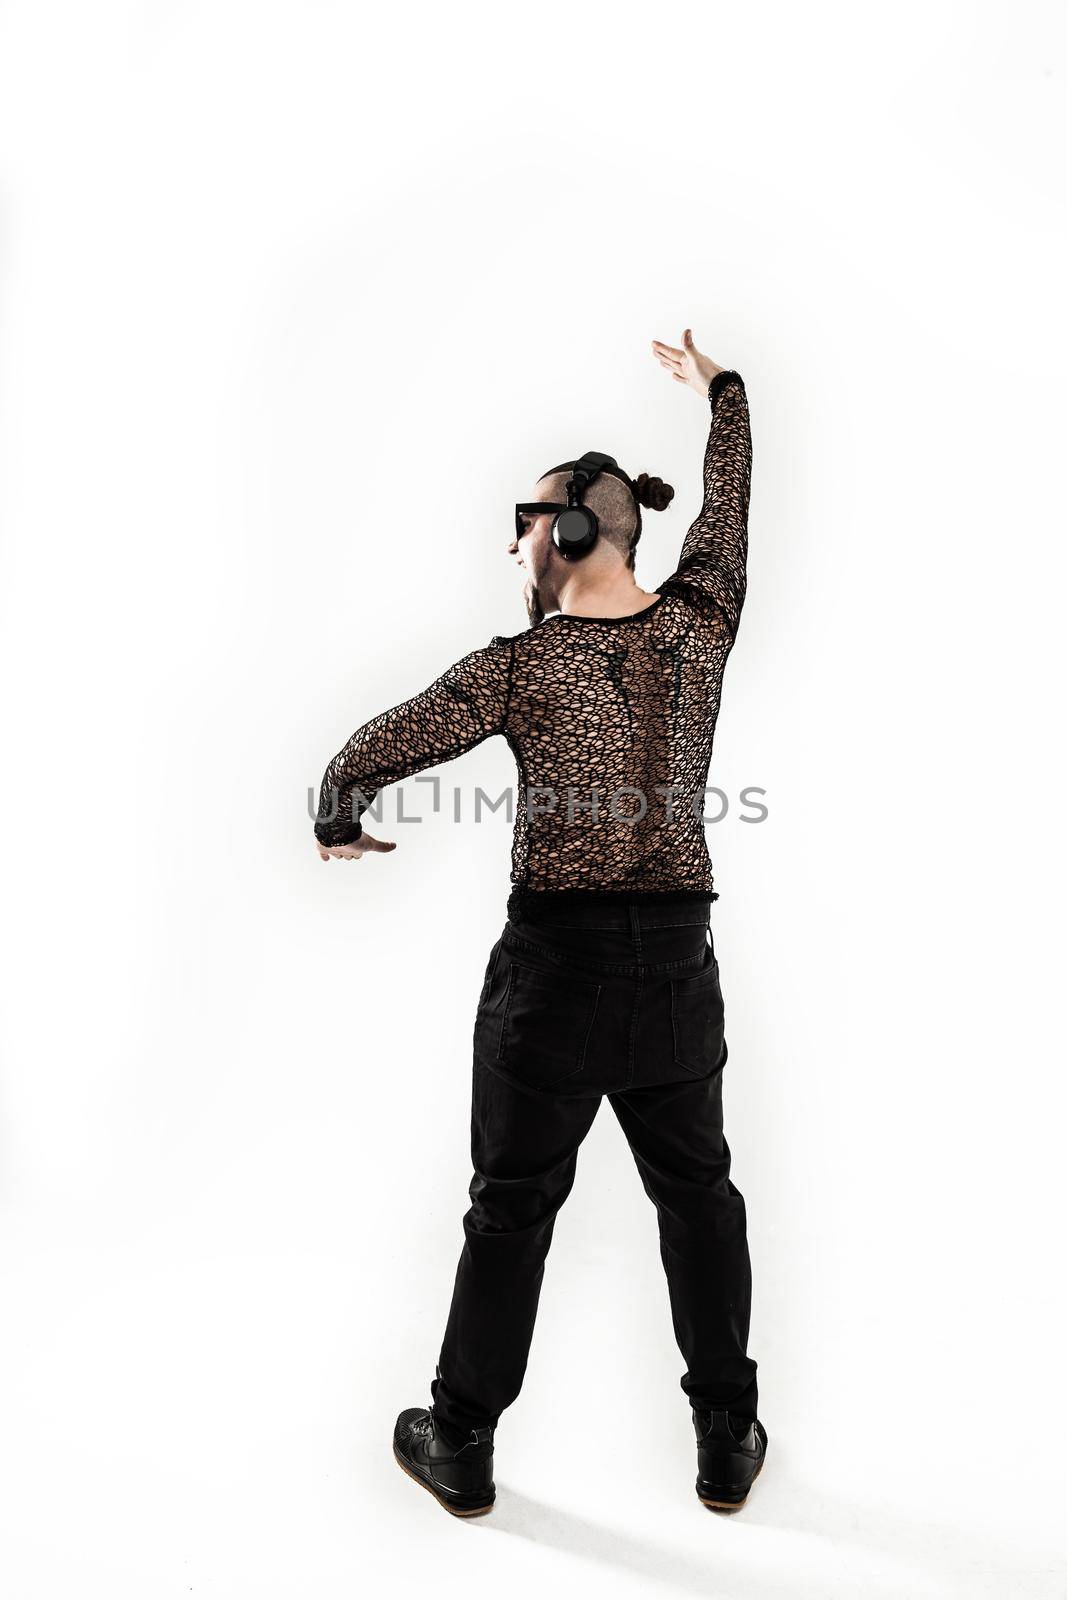 creative rapper in the headphones and dark glasses performs a rap song .photo on a white background and has an empty space for your text